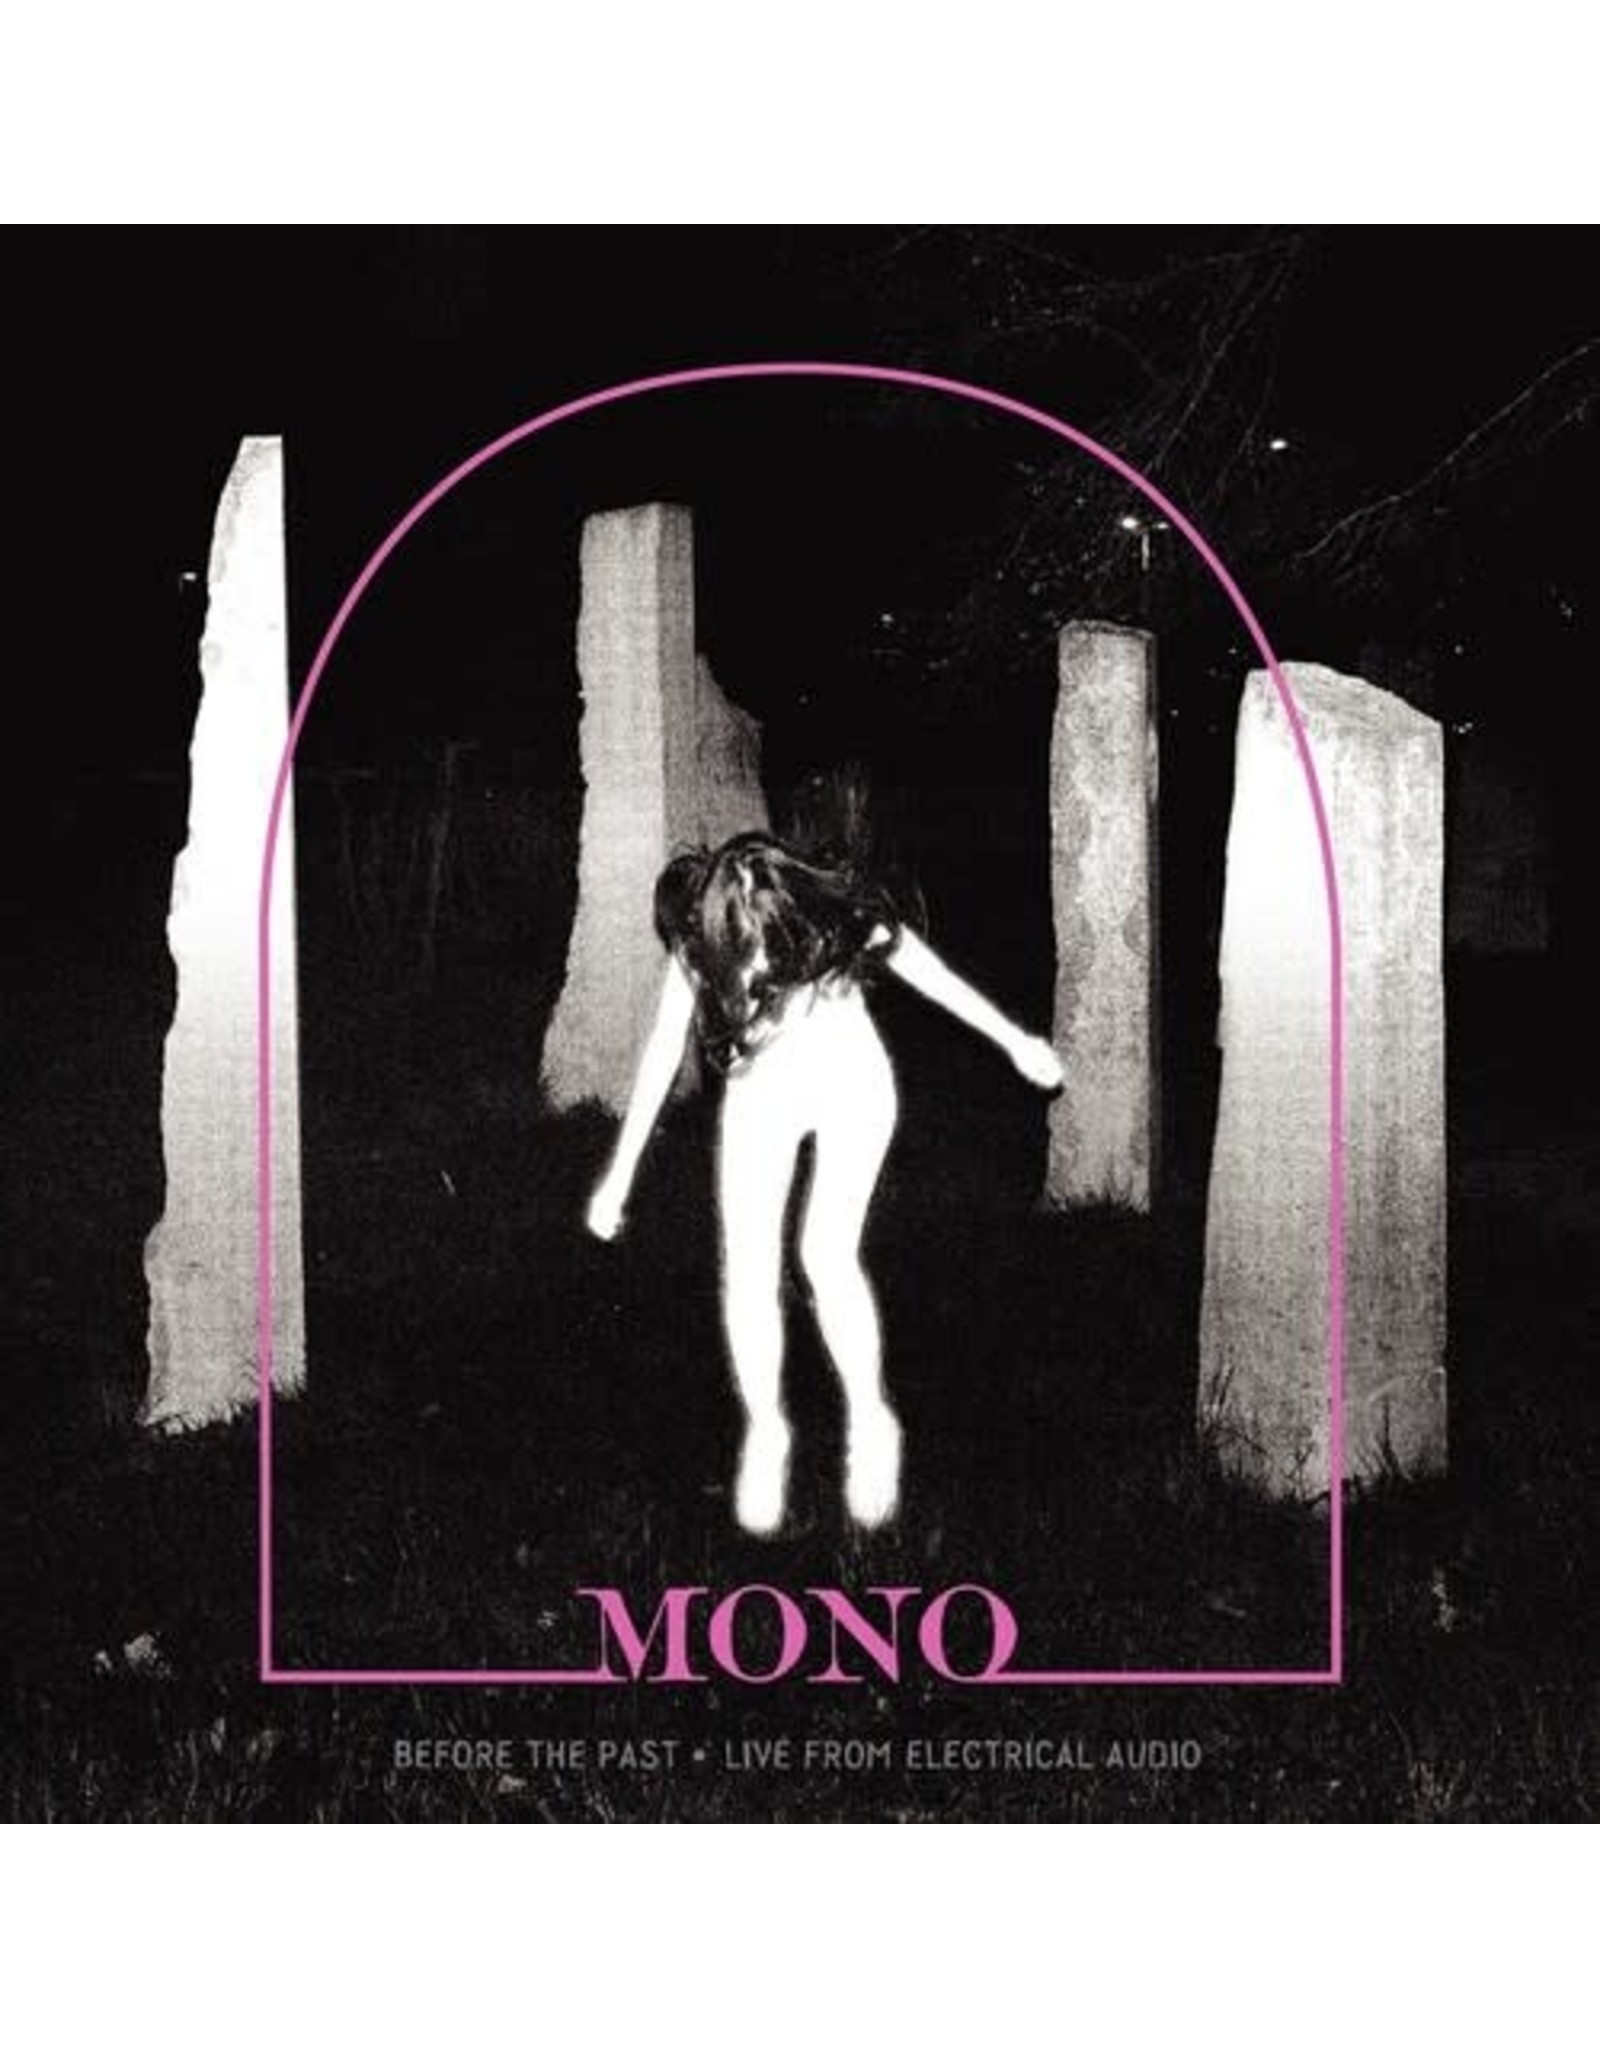 New Vinyl Mono - Before The Past: Live From Electrical Audio LP